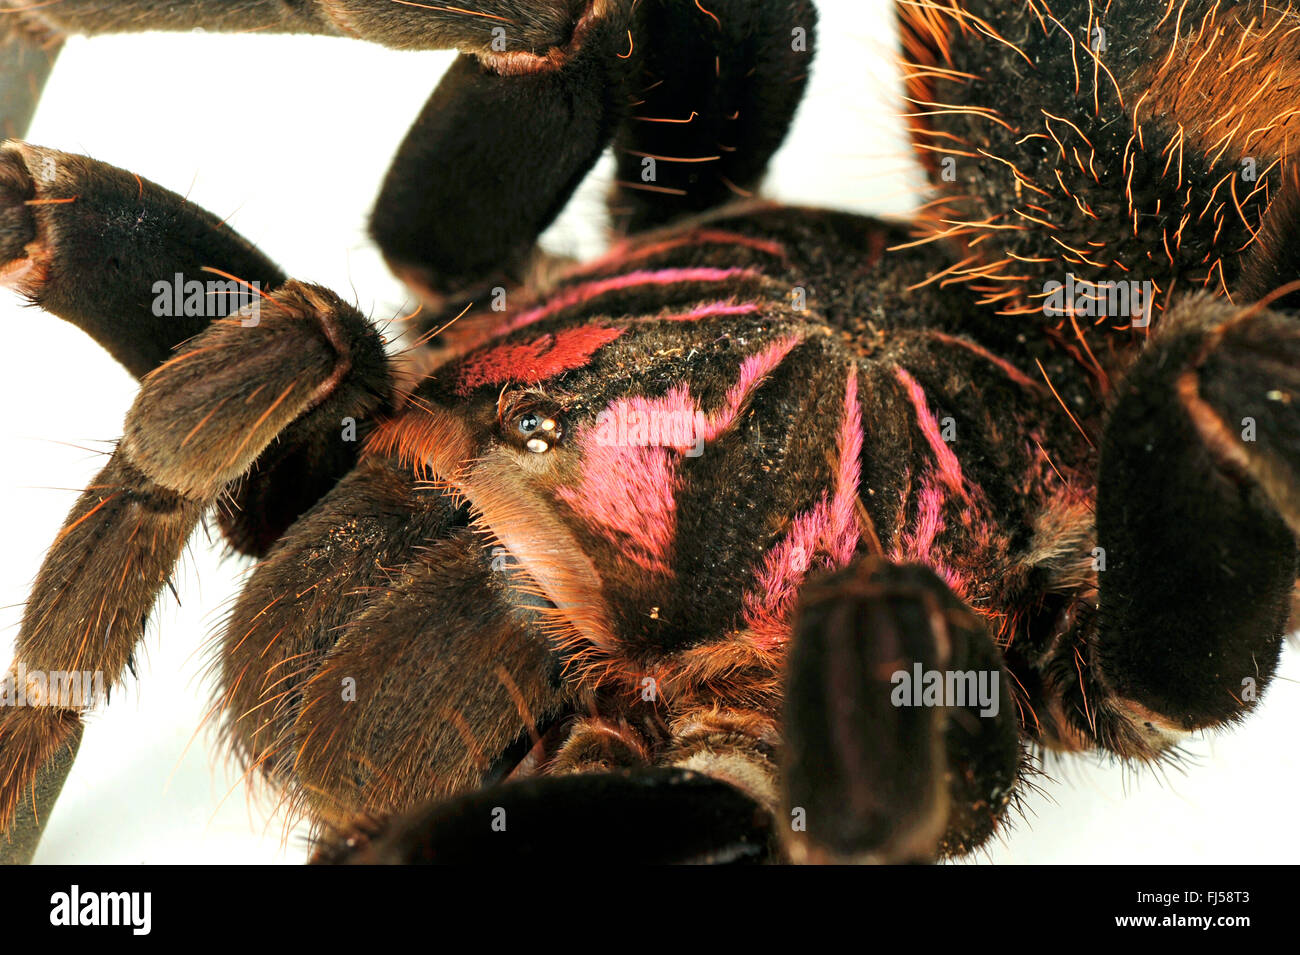 Colombian Lesserblack, Colombian lesserblack tarantula, colombian lesser black, Purple Bloom Bird-Eating Spider (Xenesthis immanis), prosomaa, cut-out Stock Photo